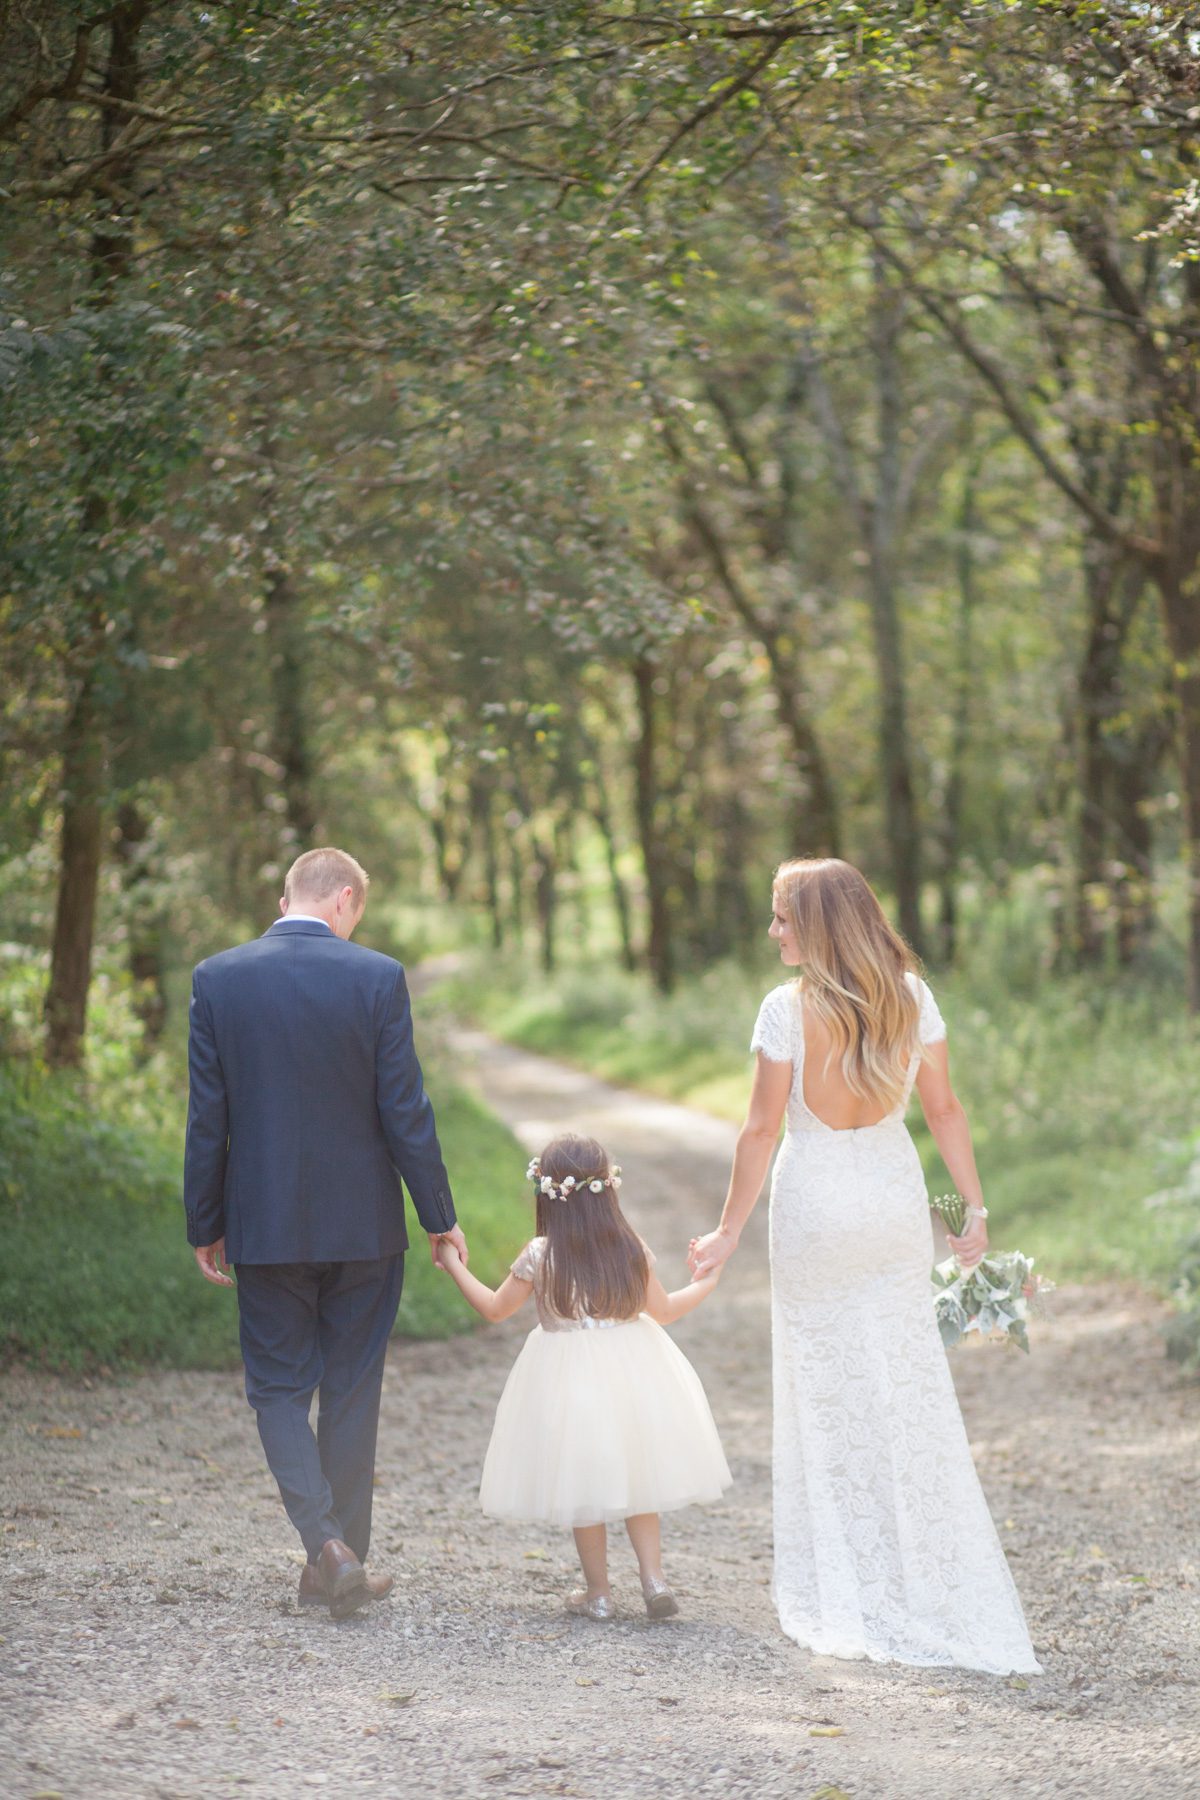 Family after wedding at Butterfly Hollow elopement wedding in Gordonsville, TN / Photography by Krista Lee